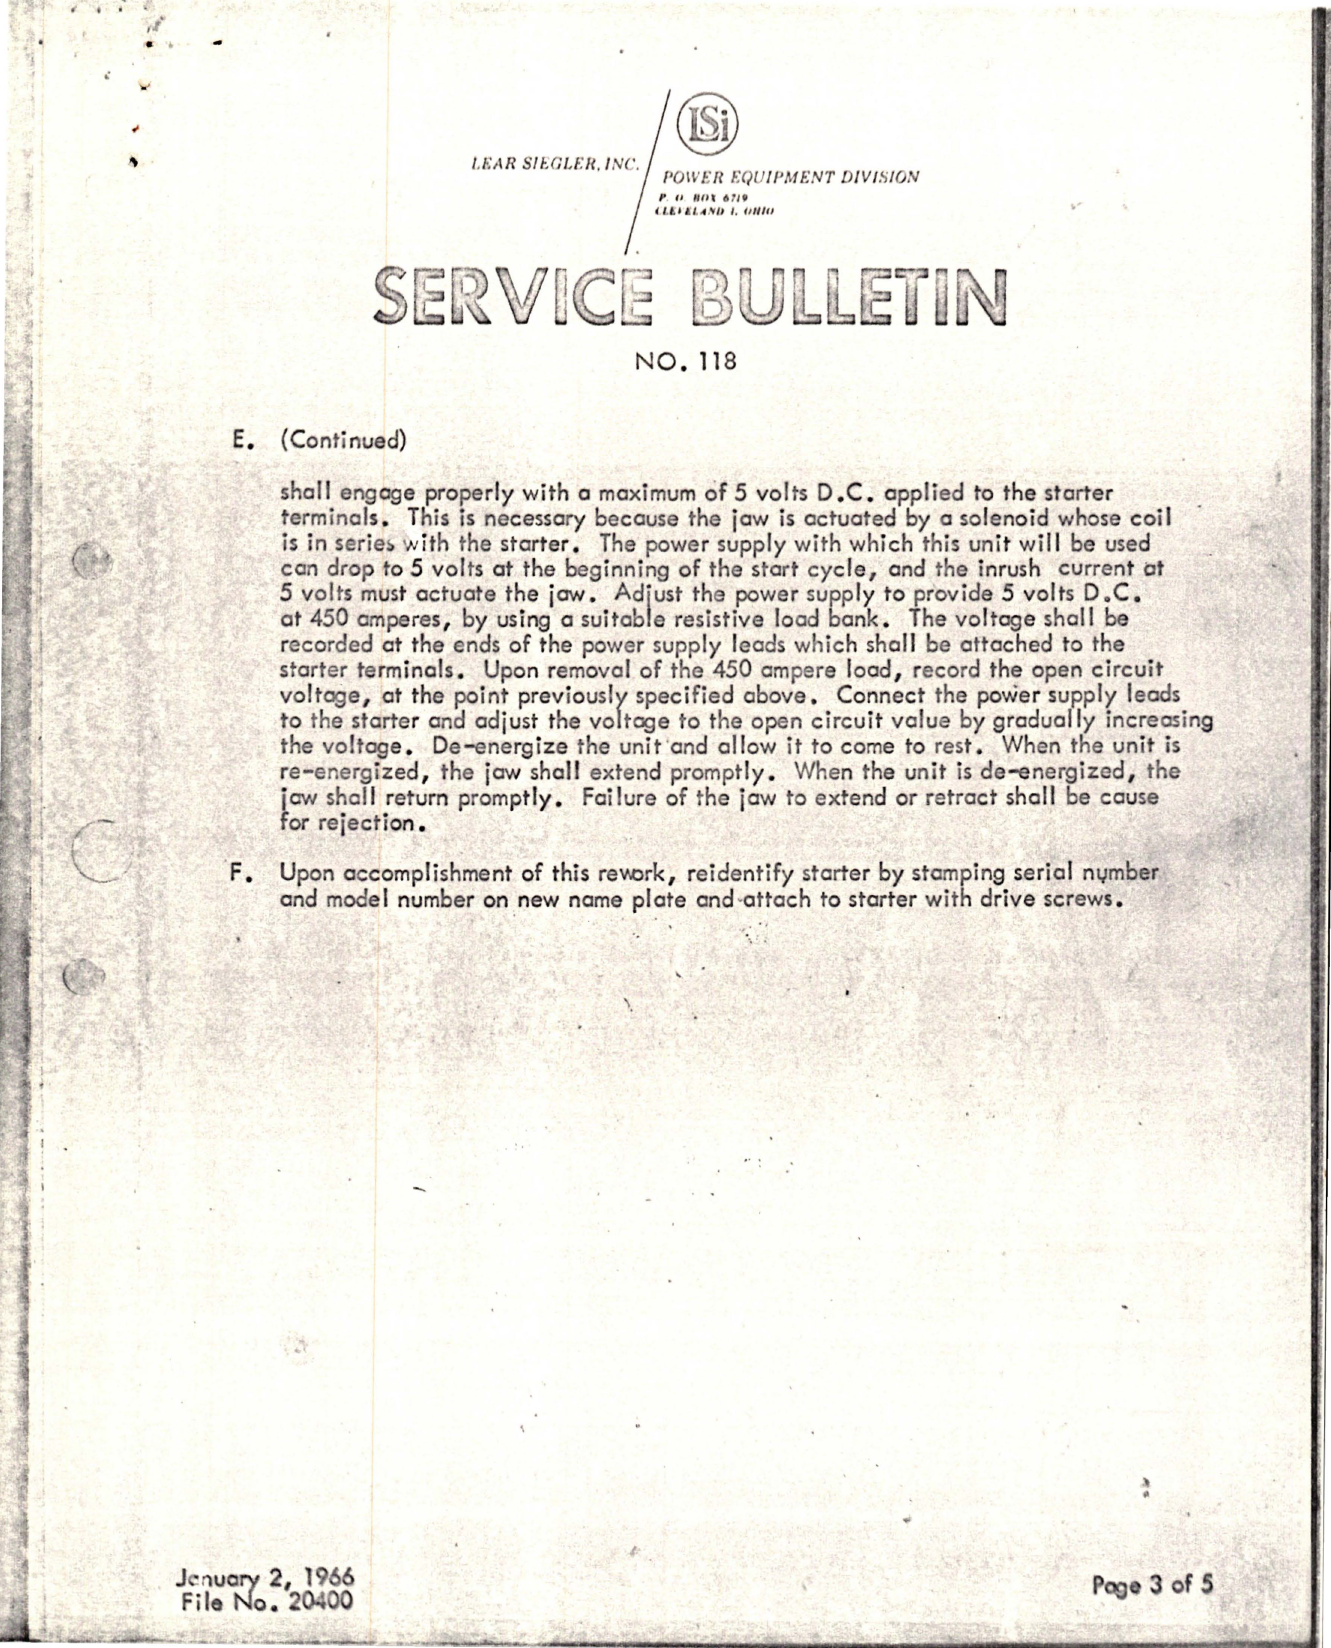 Sample page 5 from AirCorps Library document: Service Bulletin No. 118 for Starter Modification - Model 20069-005 and 20069-008